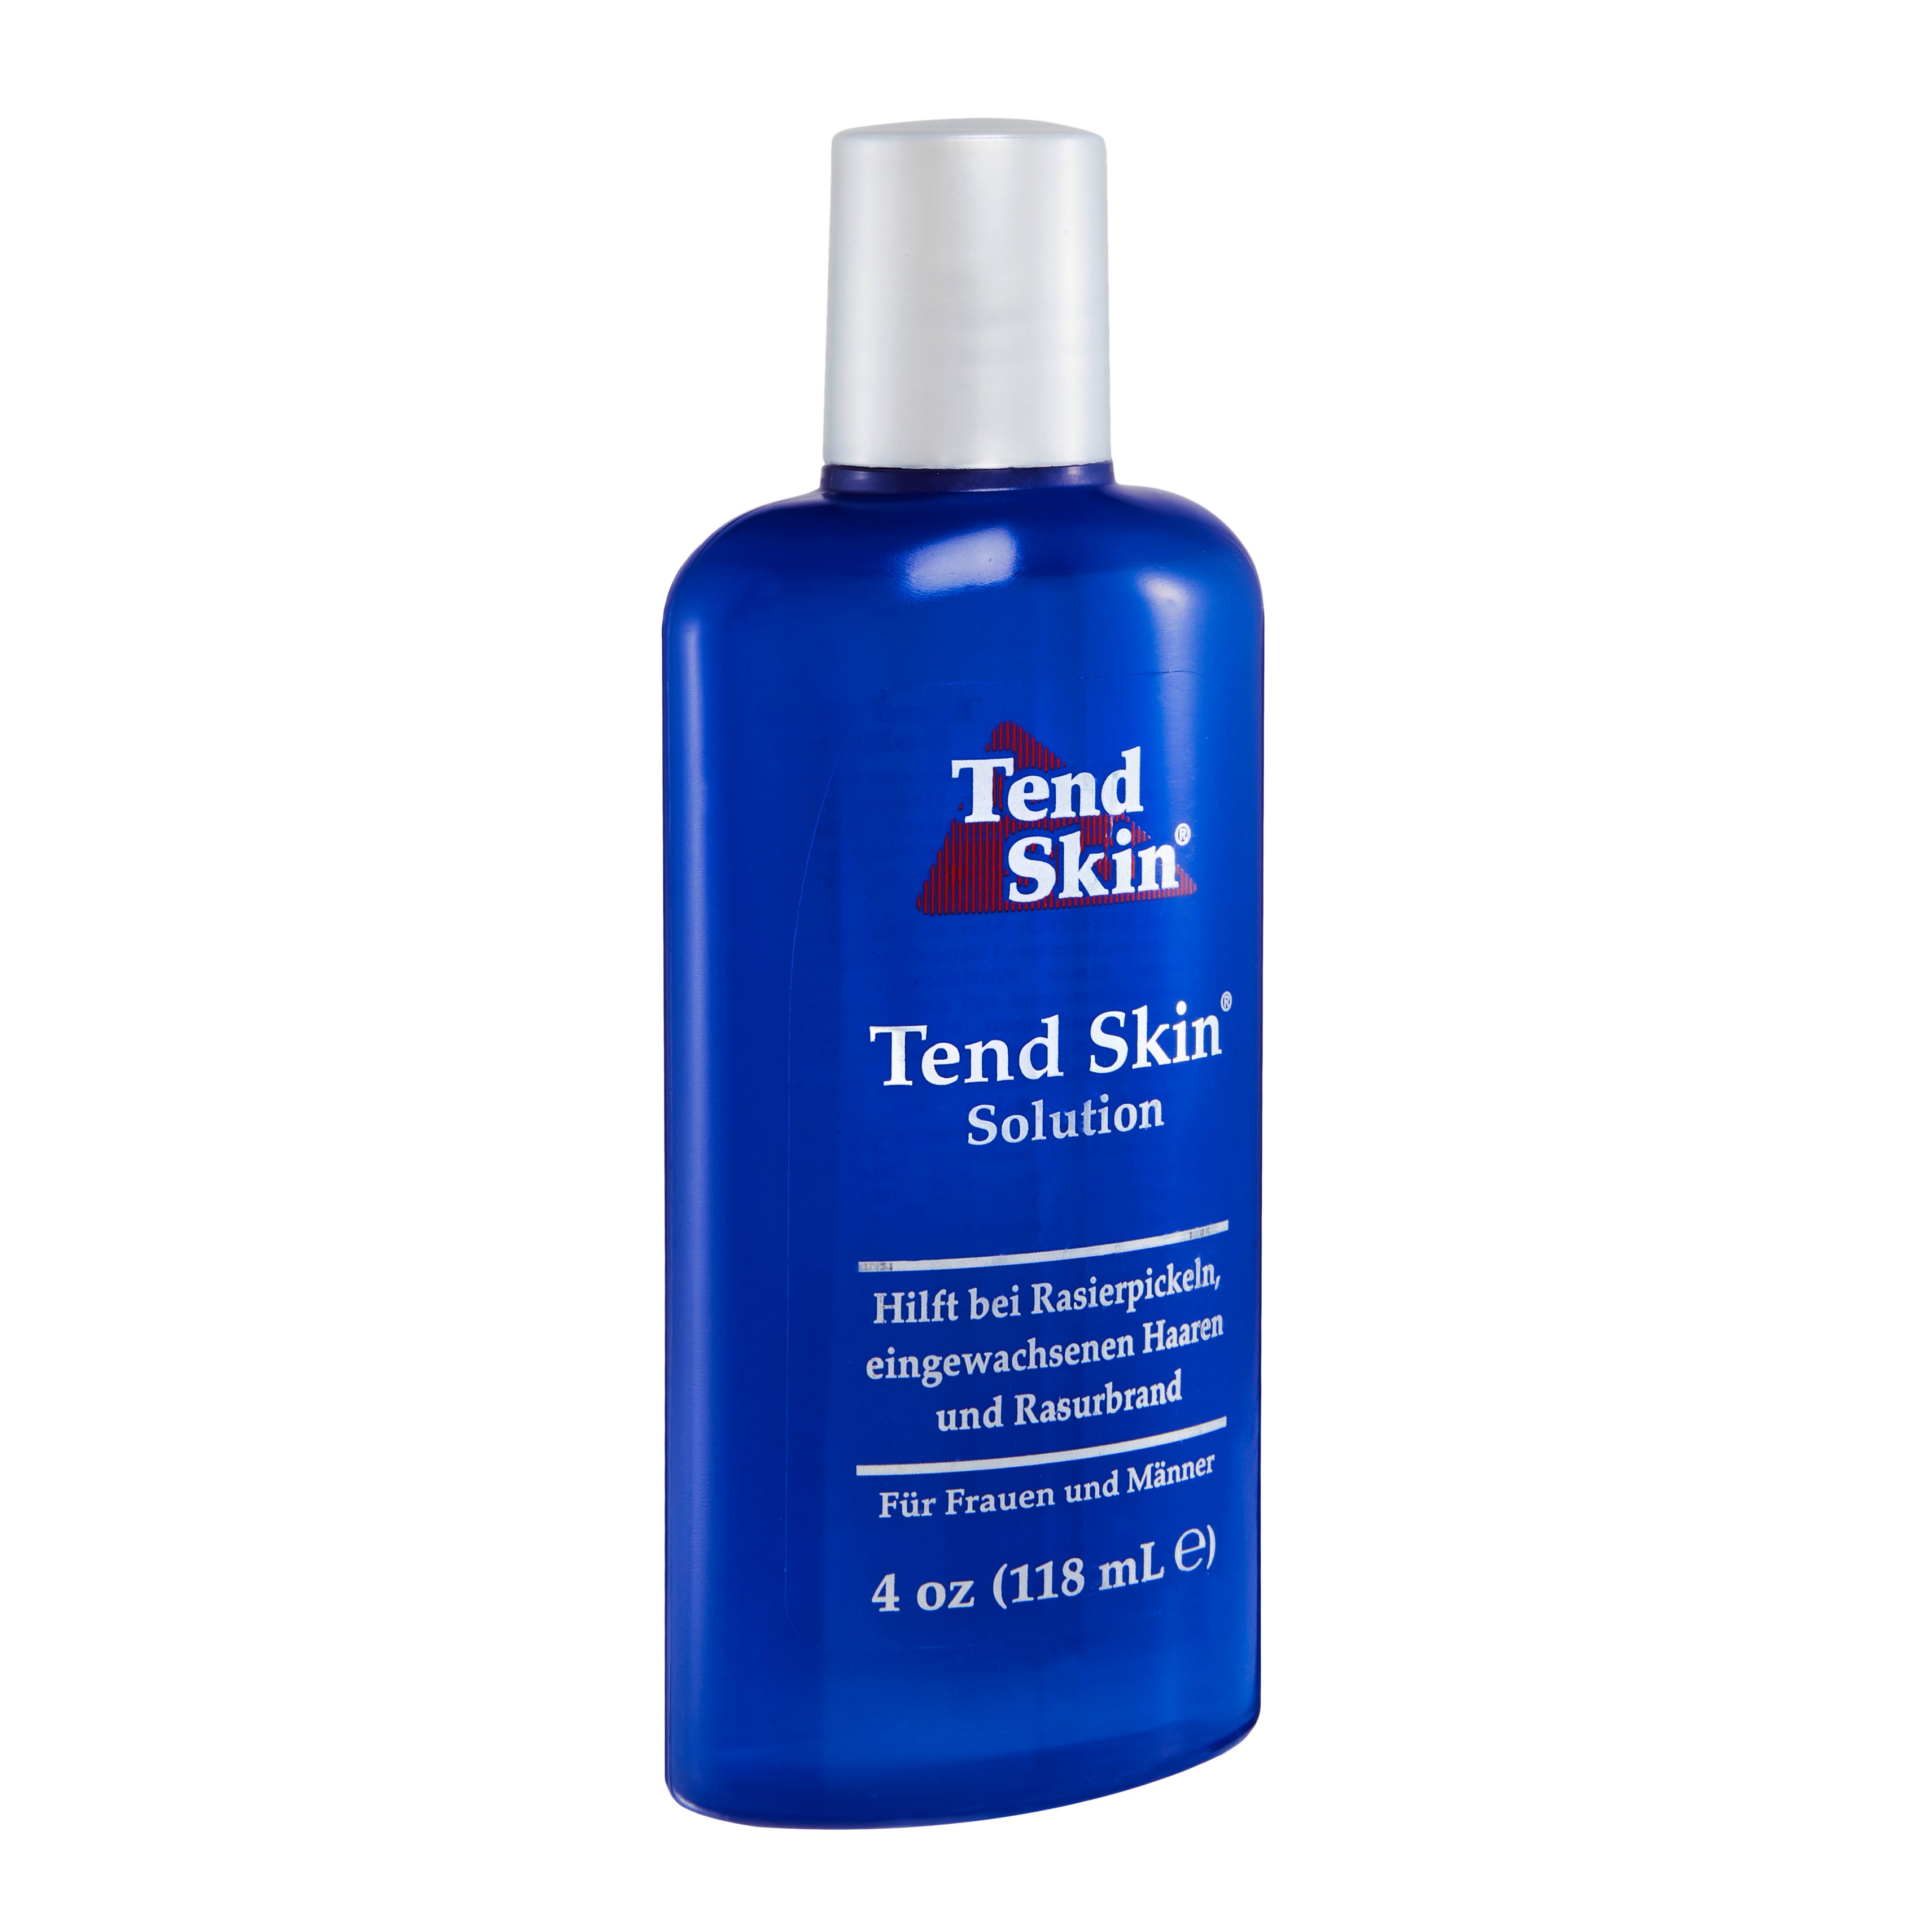 Tend Skin After-Shave 118ml Solution